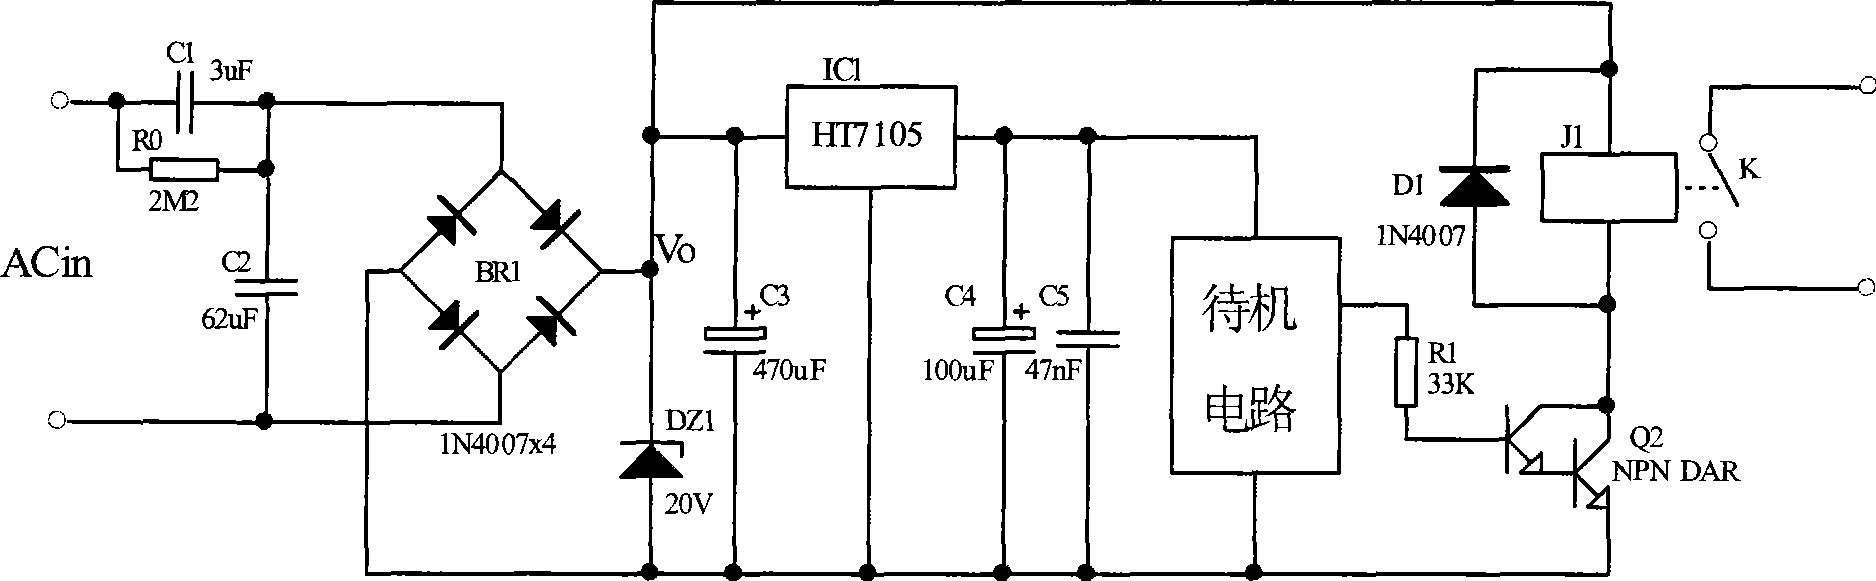 Ultramicro power consumption standby power supply